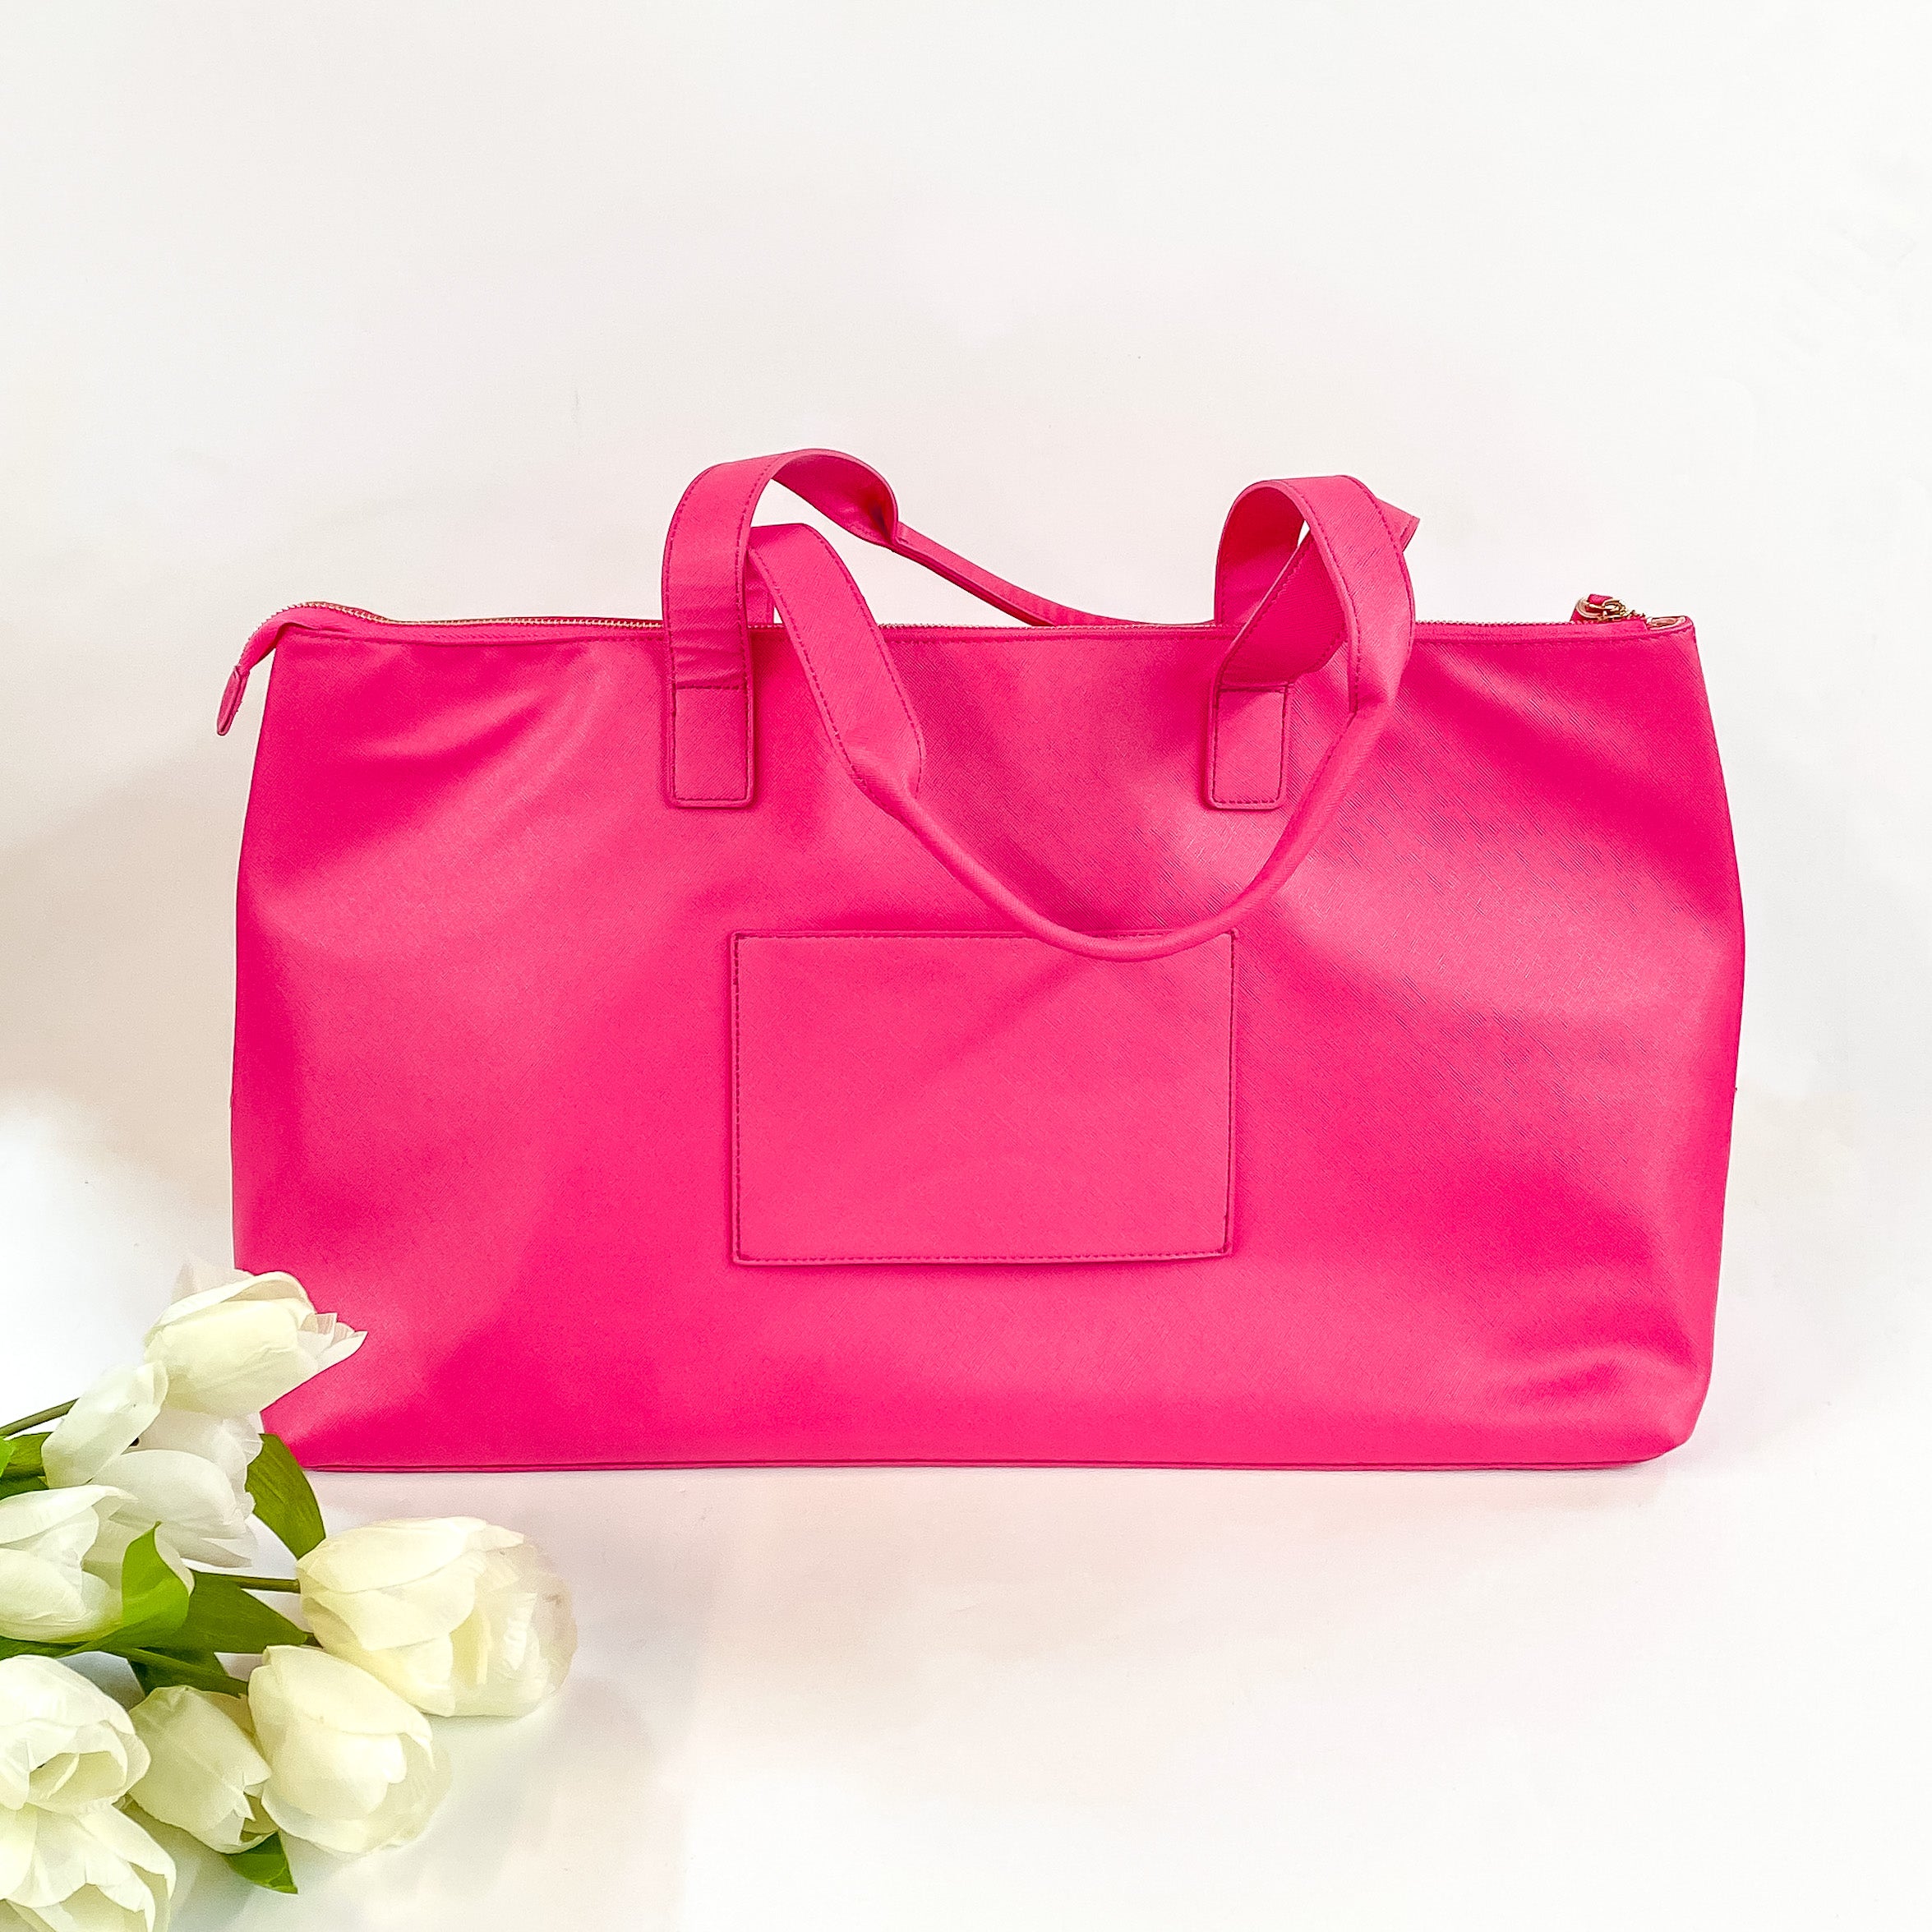 Hollis | Slumber Party Overnighter in Hot Pink - Giddy Up Glamour Boutique